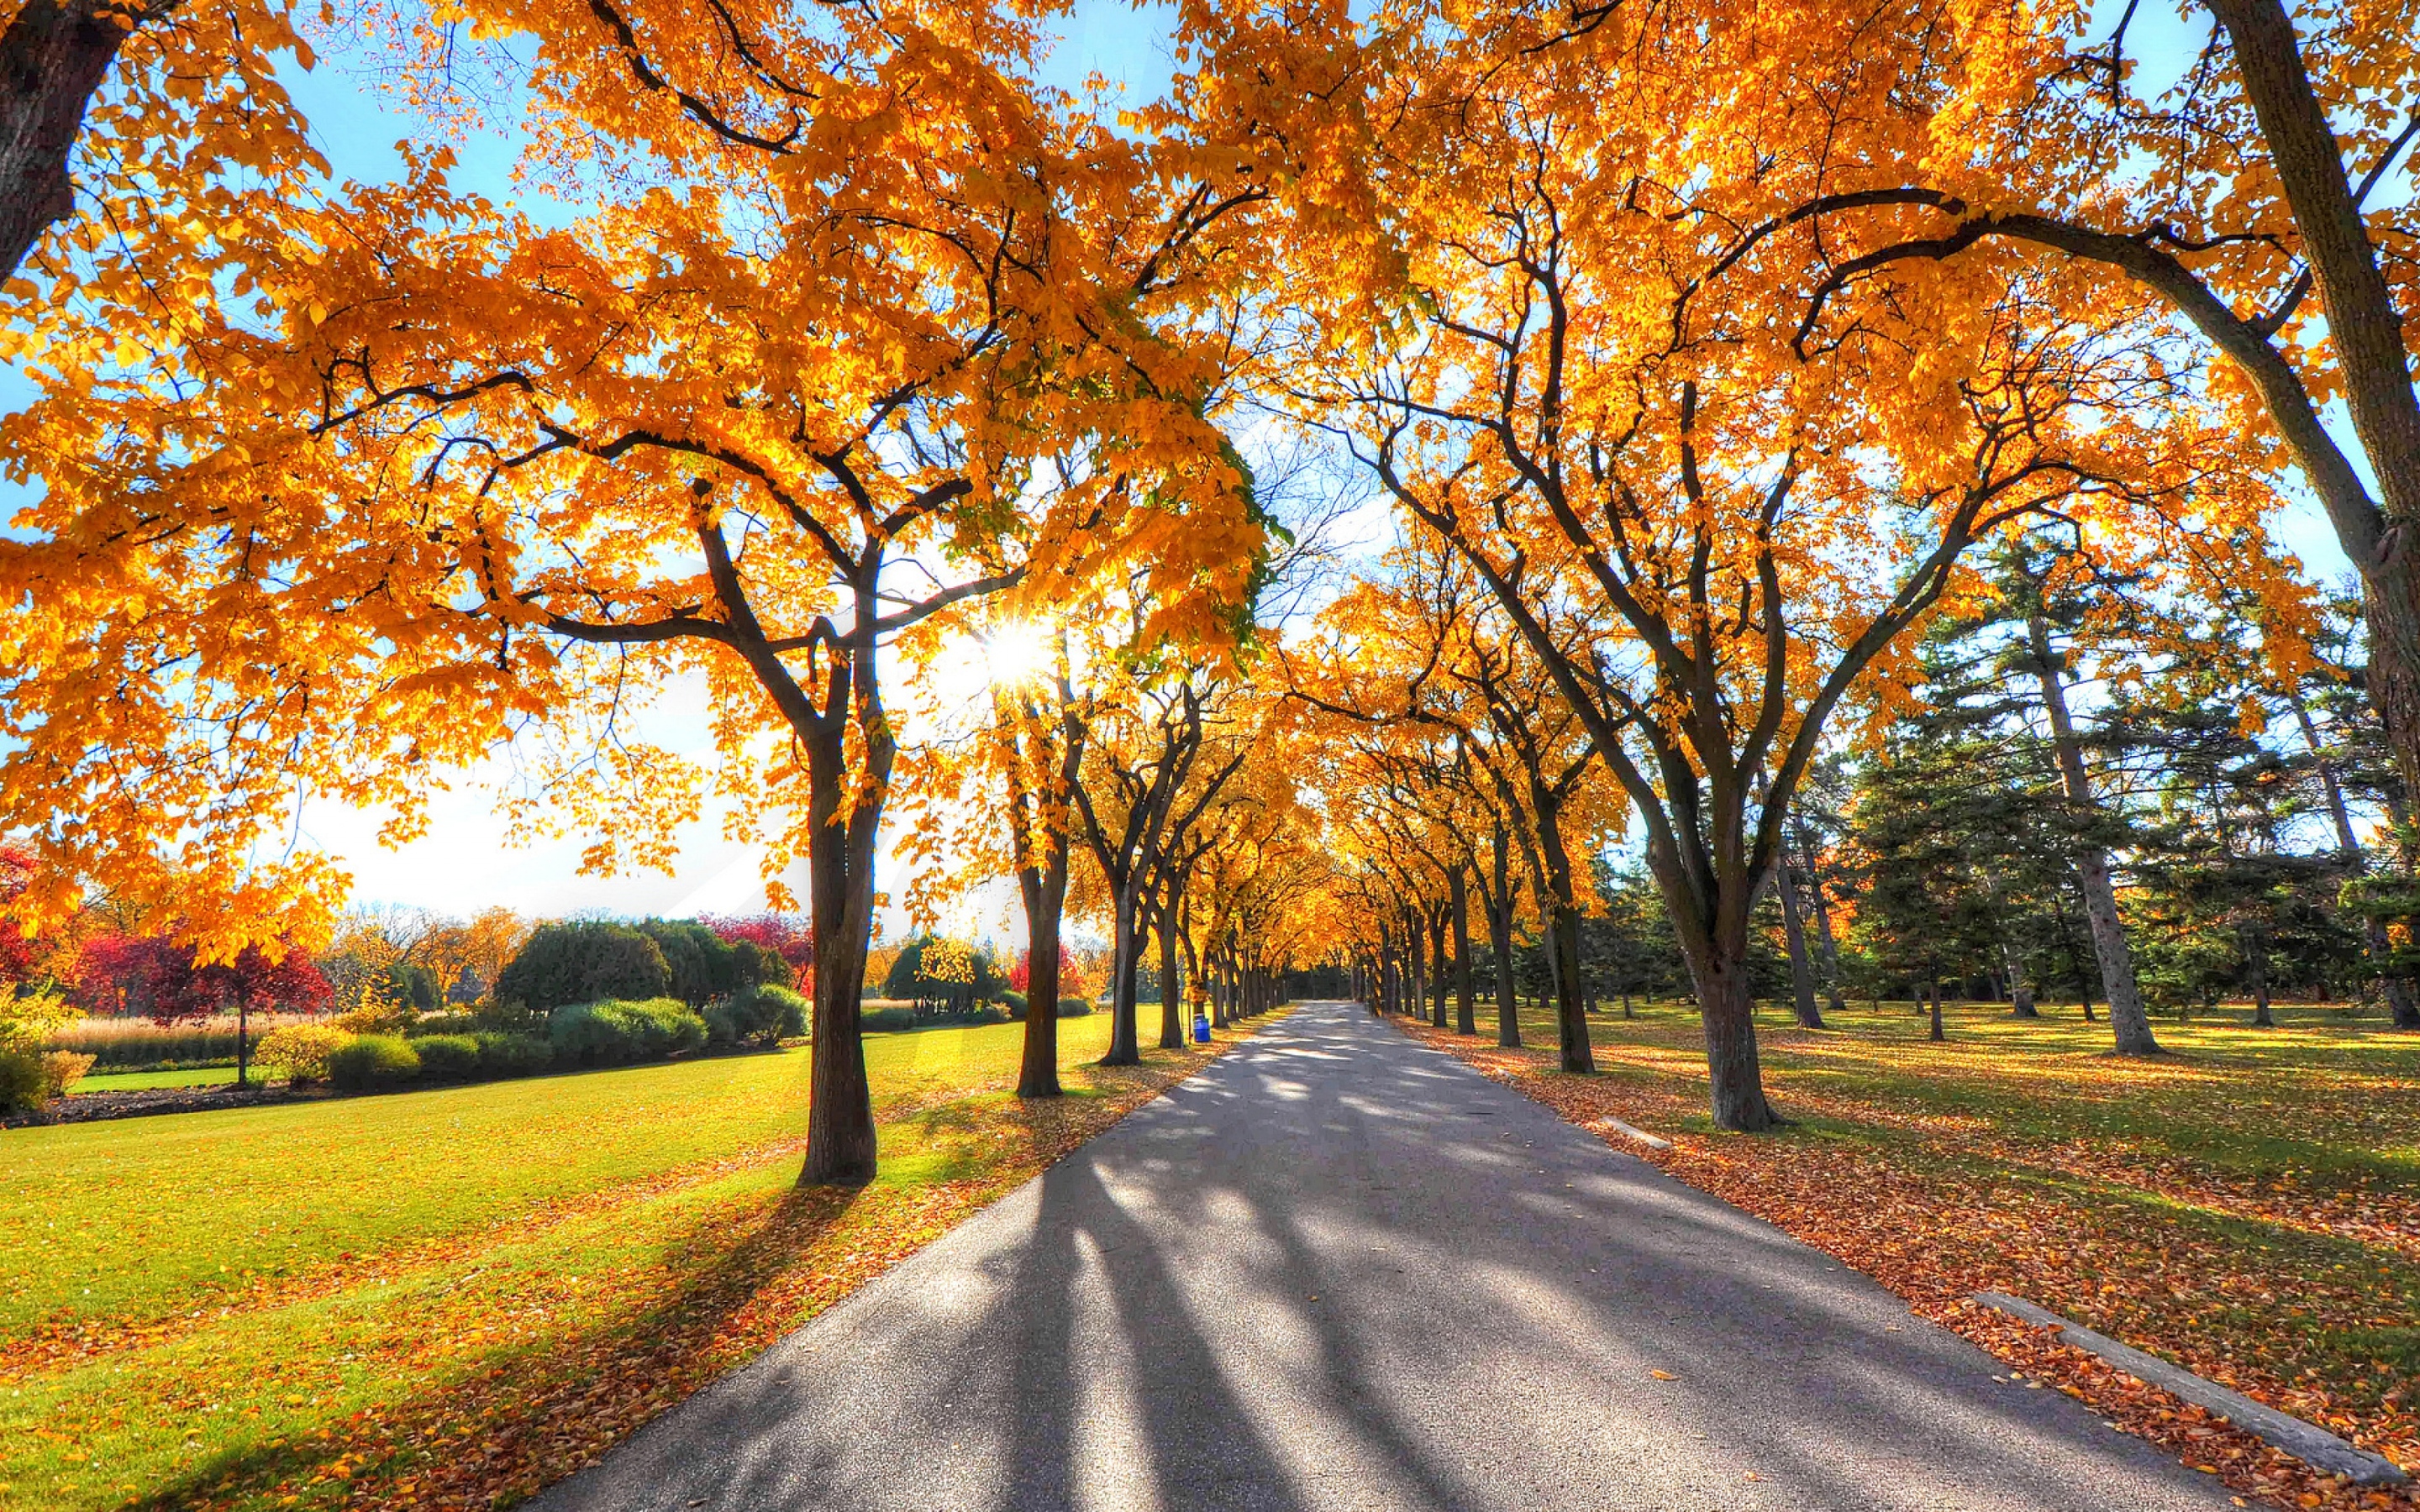 Autumn Alley Park Macbook Pro Retina HD 4k Wallpaper, Image, Background, Photo and Picture